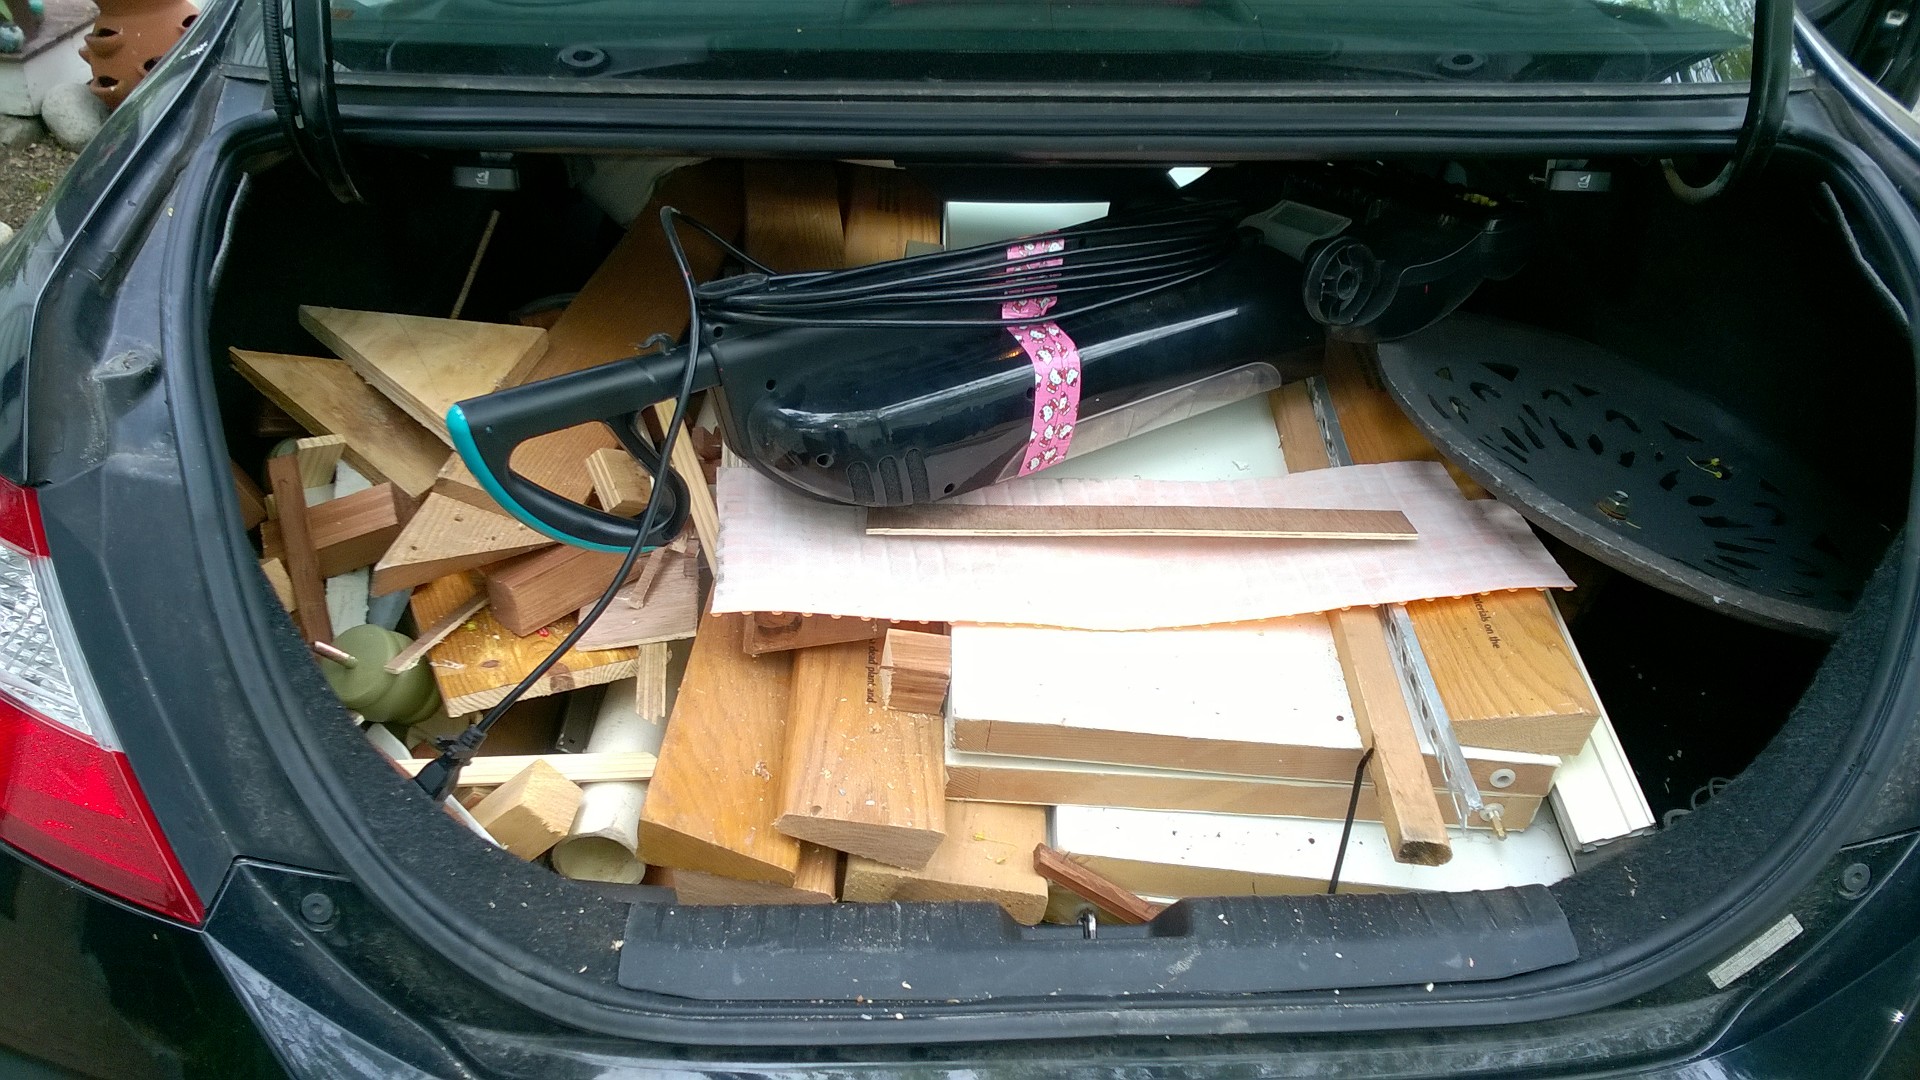 I Went to THE DUMP!